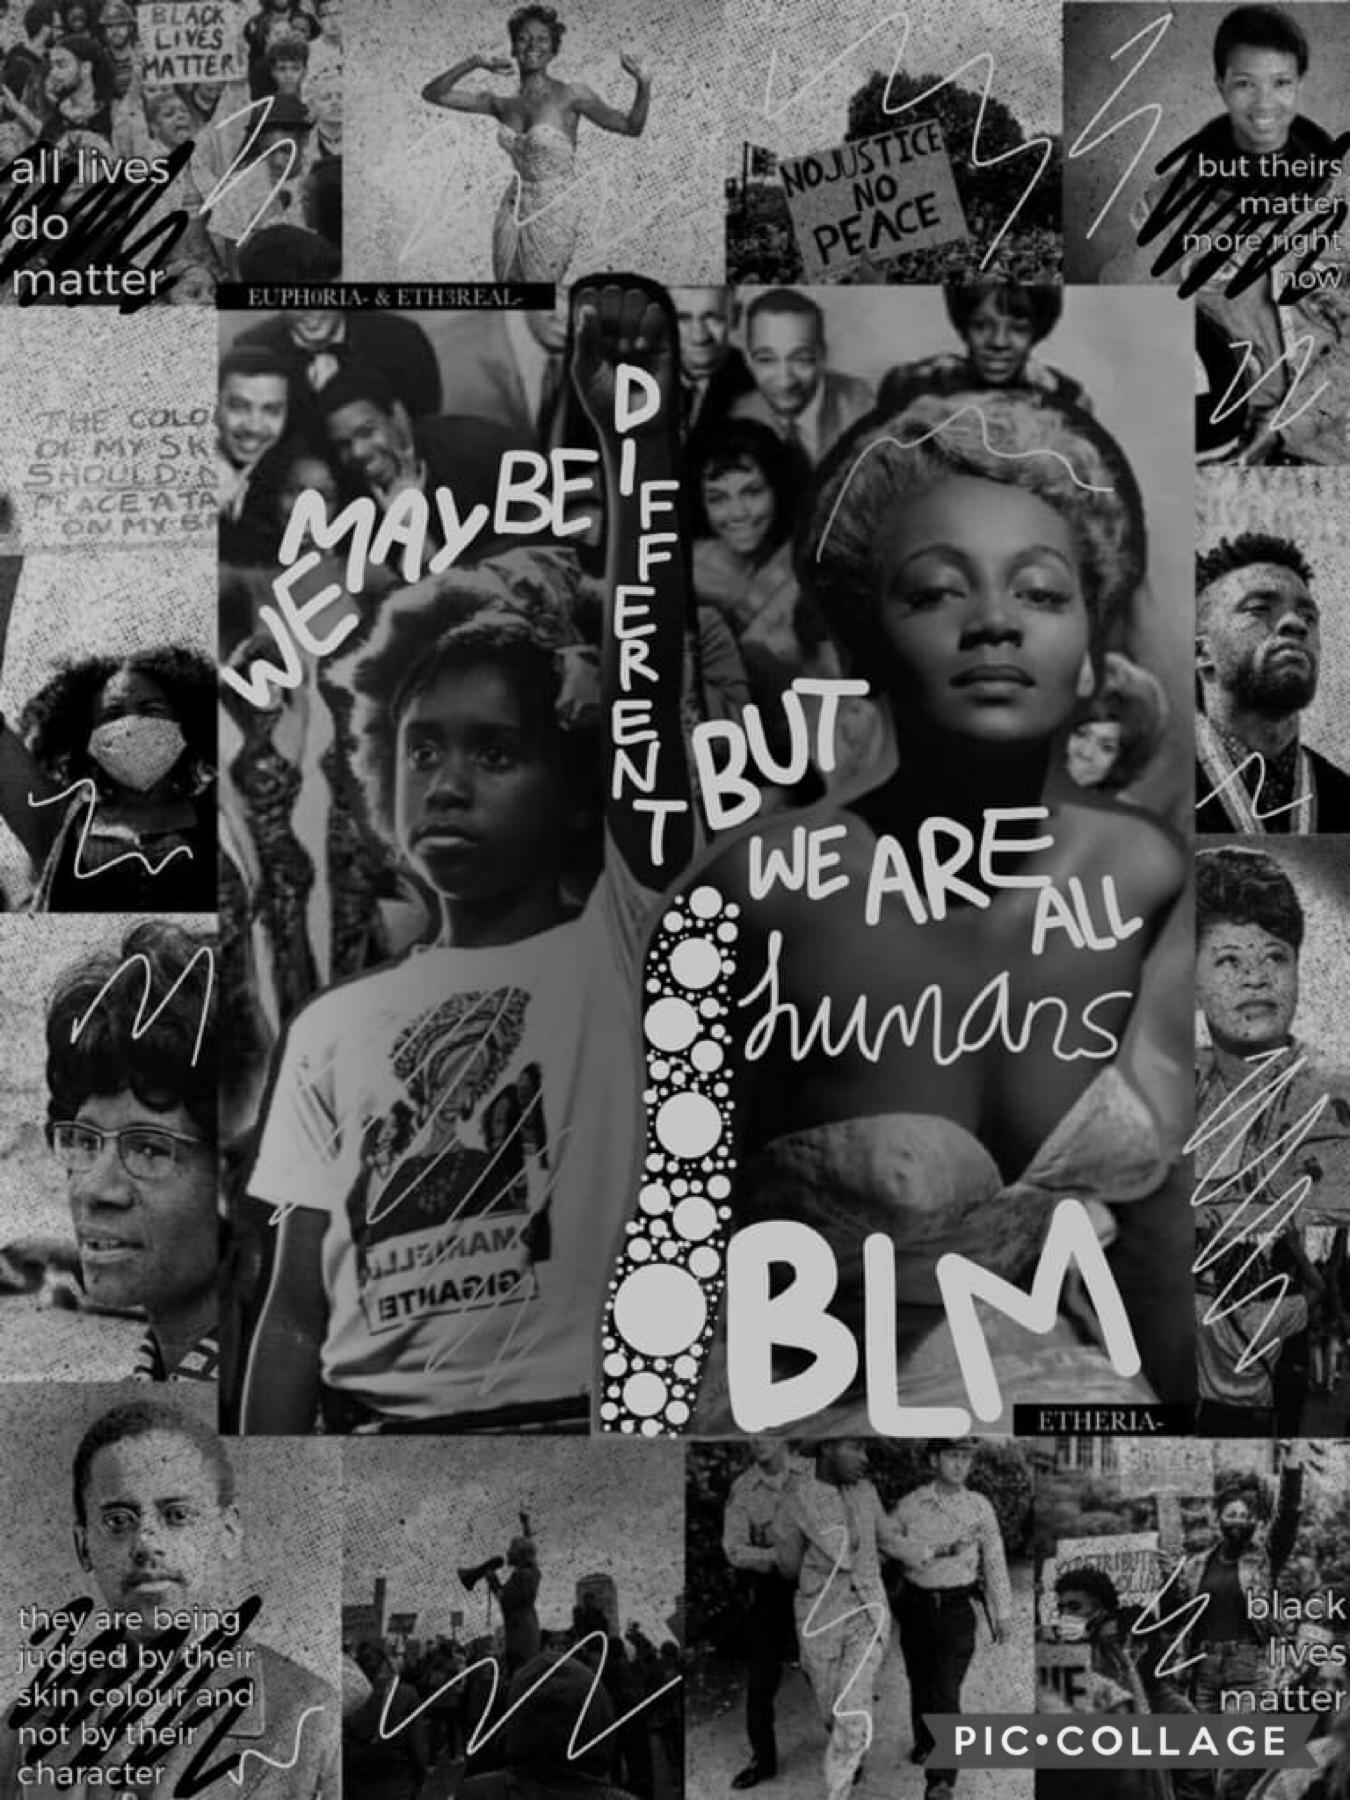 ✊🏾Black History Month✊🏾
Our first collage in our collab series, and it’s about black history month! Since the blm movement is apart of black history, we added it in! Inspired by timelessdreams!
